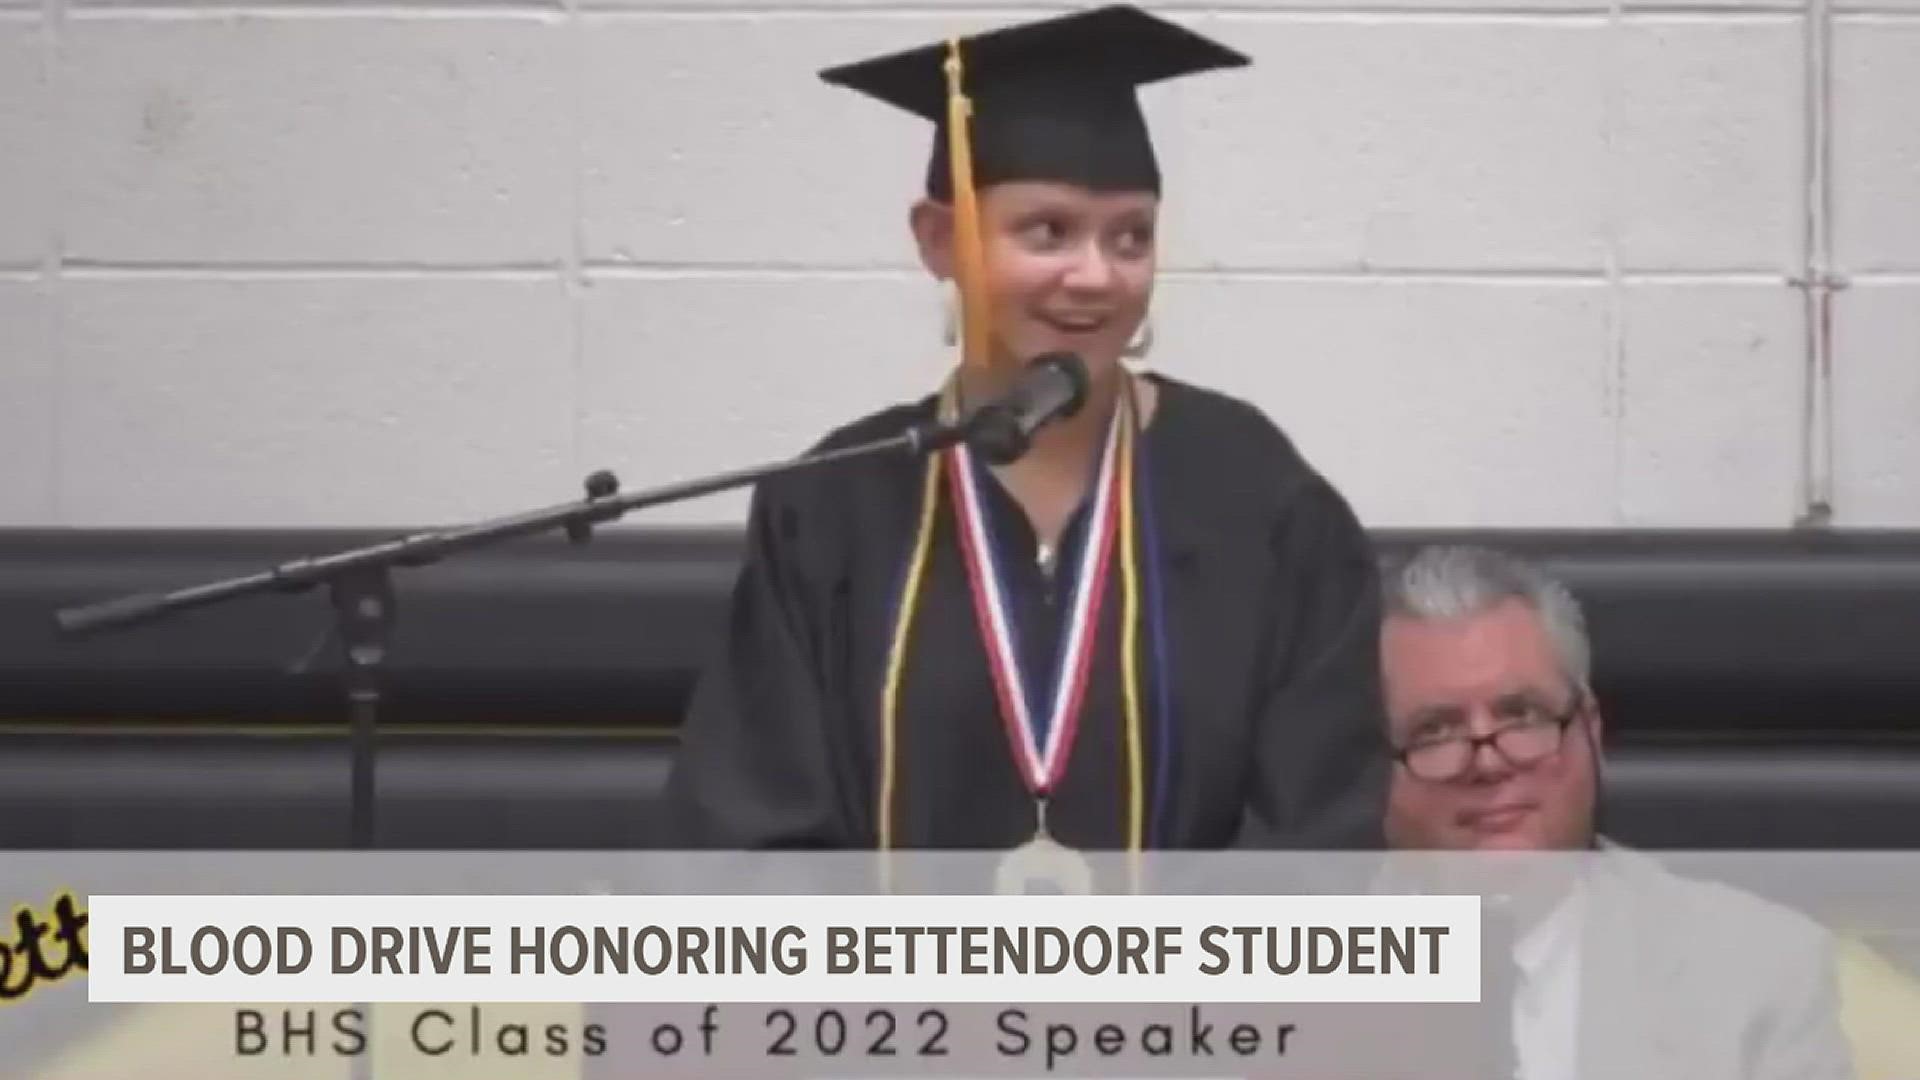 'Give like Charly' honored recent Bettendorf High School graduate Charly Erpelding, who lost her battle with cancer in October 2022.